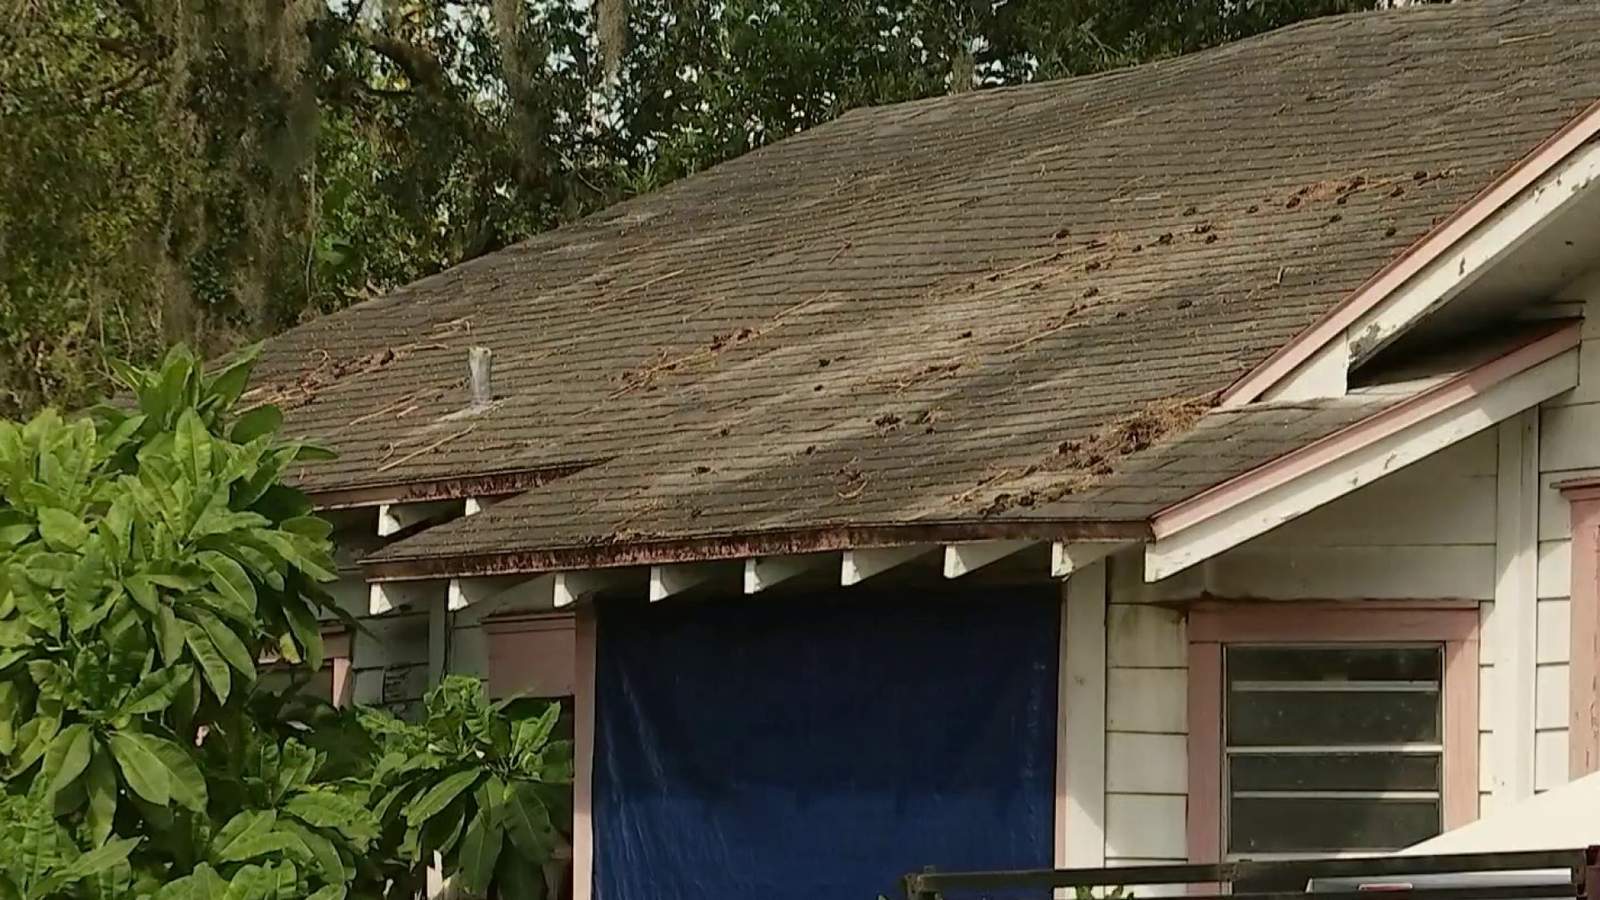 Can you pitch in? Community’s help needed to save Orlando woman’s home